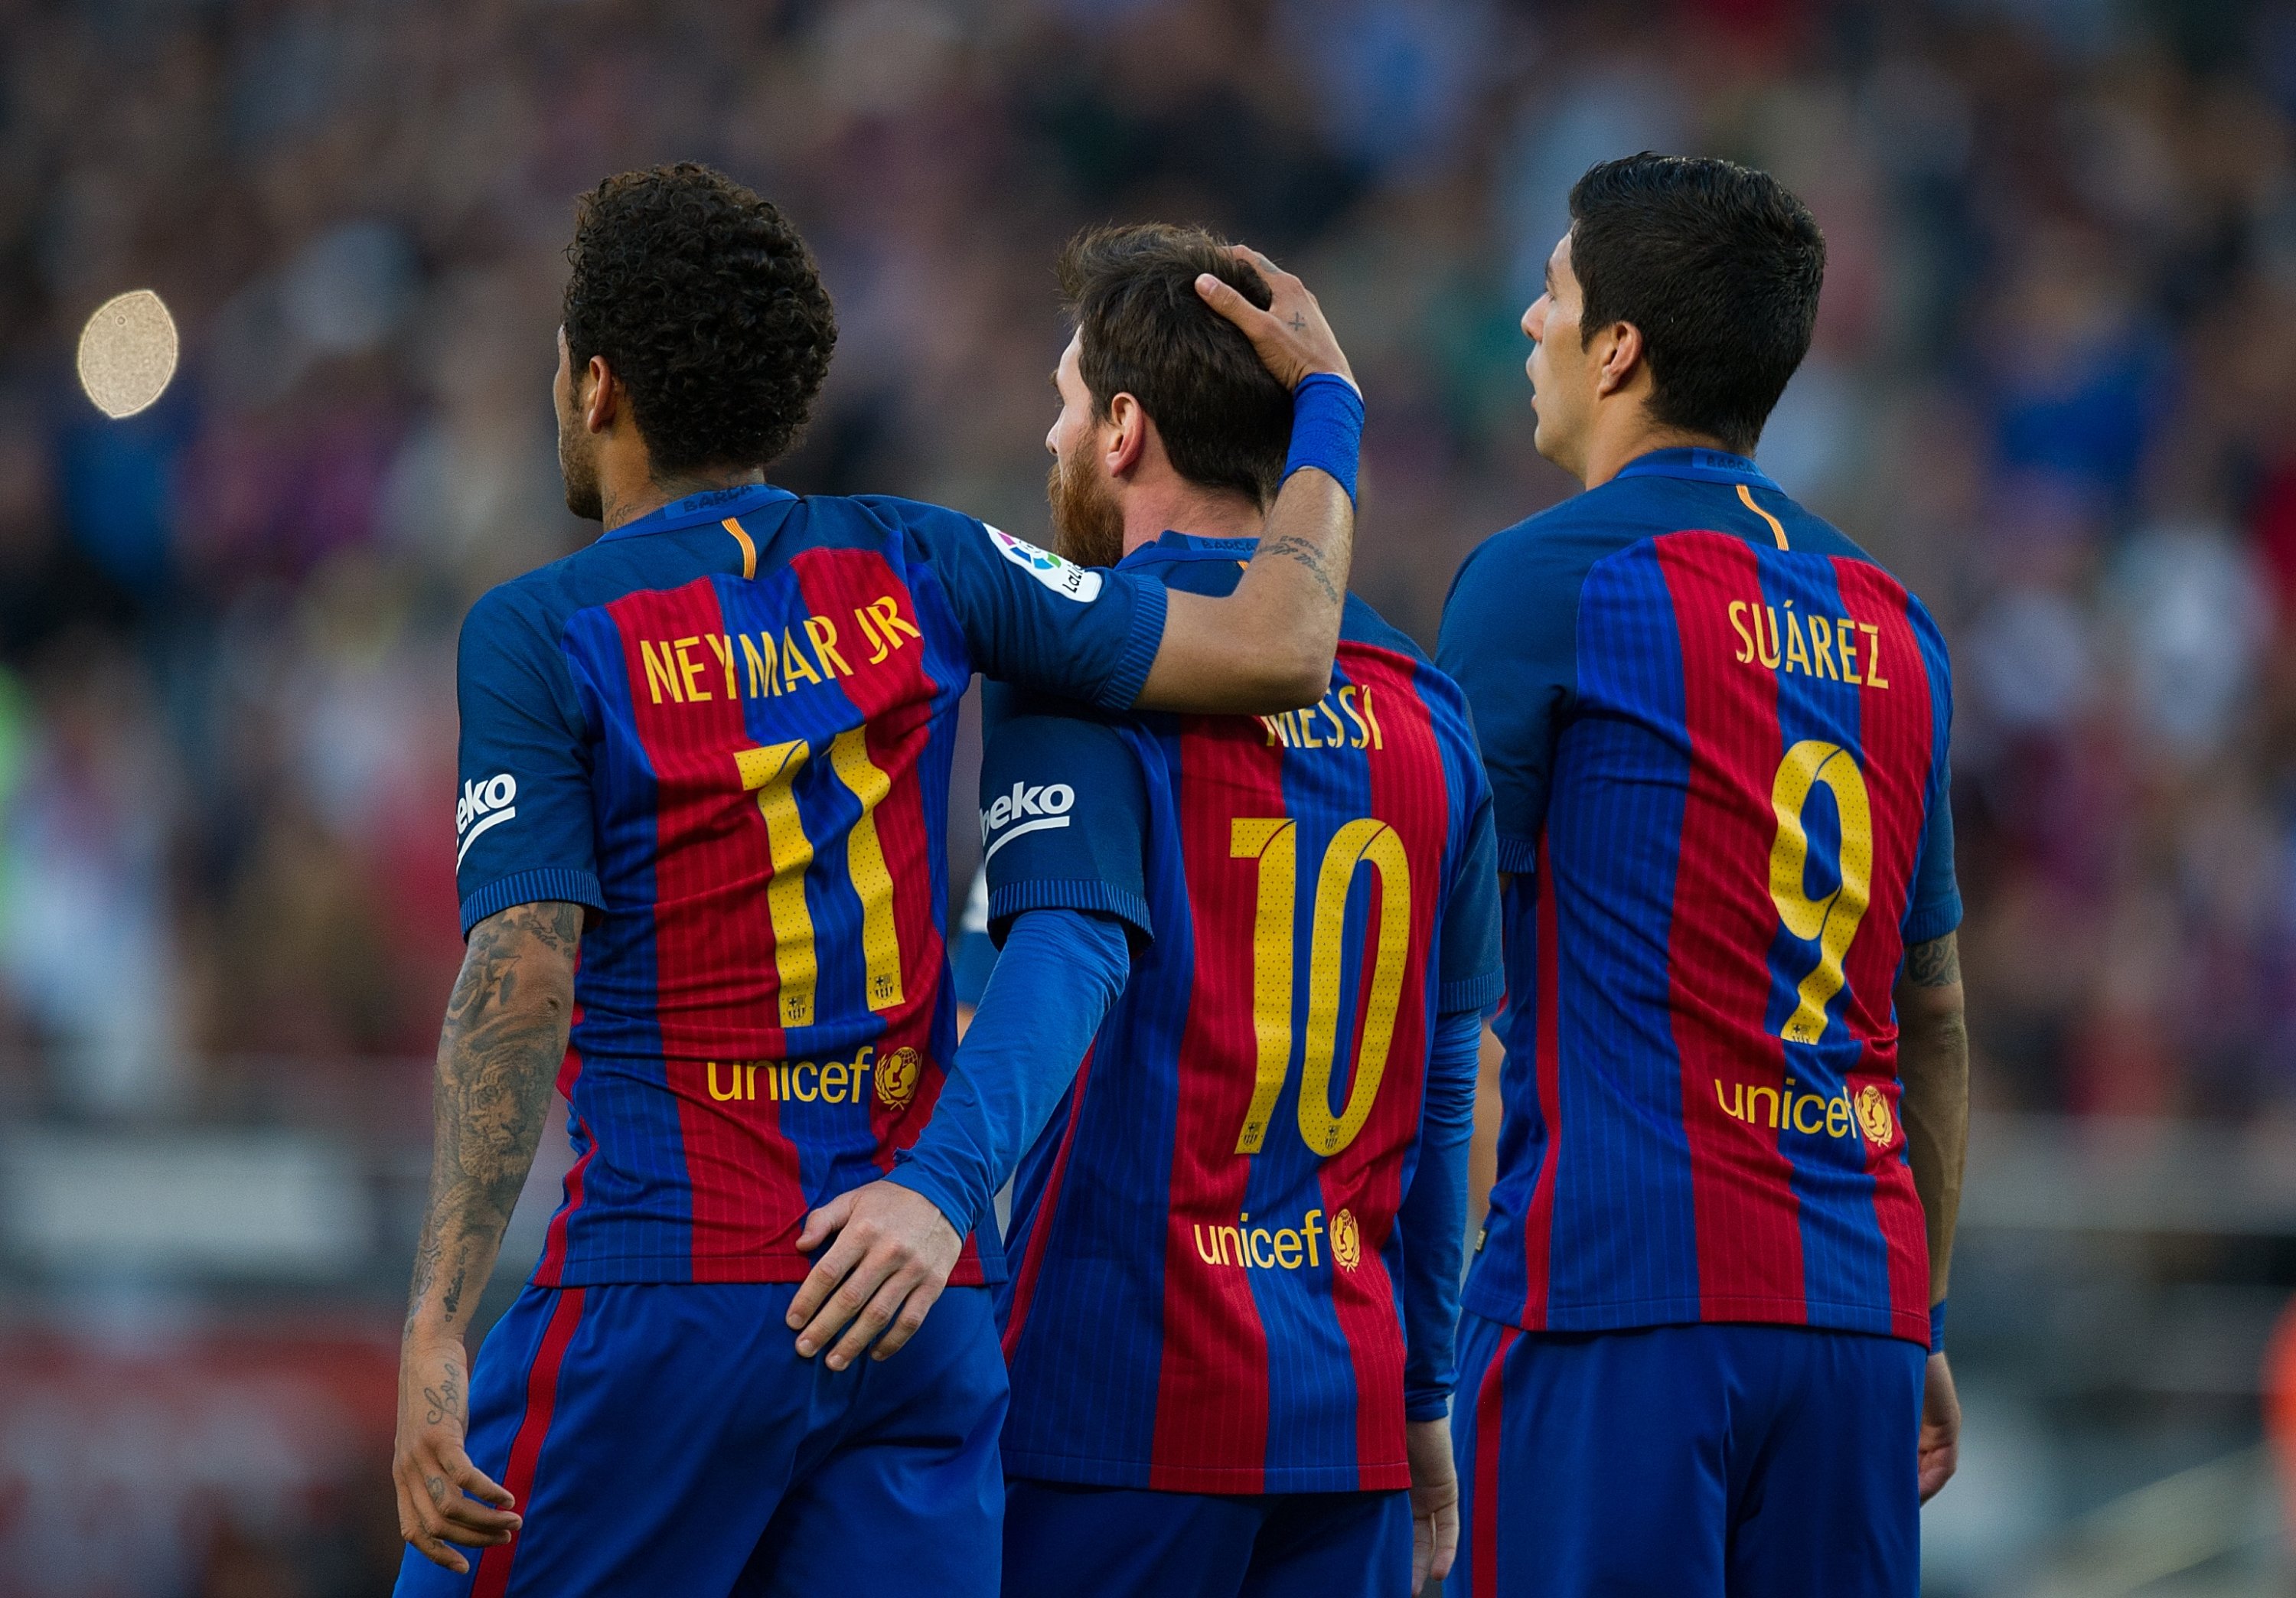 FC Barcelona's Lionel Messi (C) celebrates with Neymar (L) and Luis Suarez after scoring his team's third goal from the penalty spot during the La Liga match between FC Barcelona and Villarreal CF at Camp Nou stadium, Barcelona, Spain, May 6, 2017.  (Getty Images Photo)